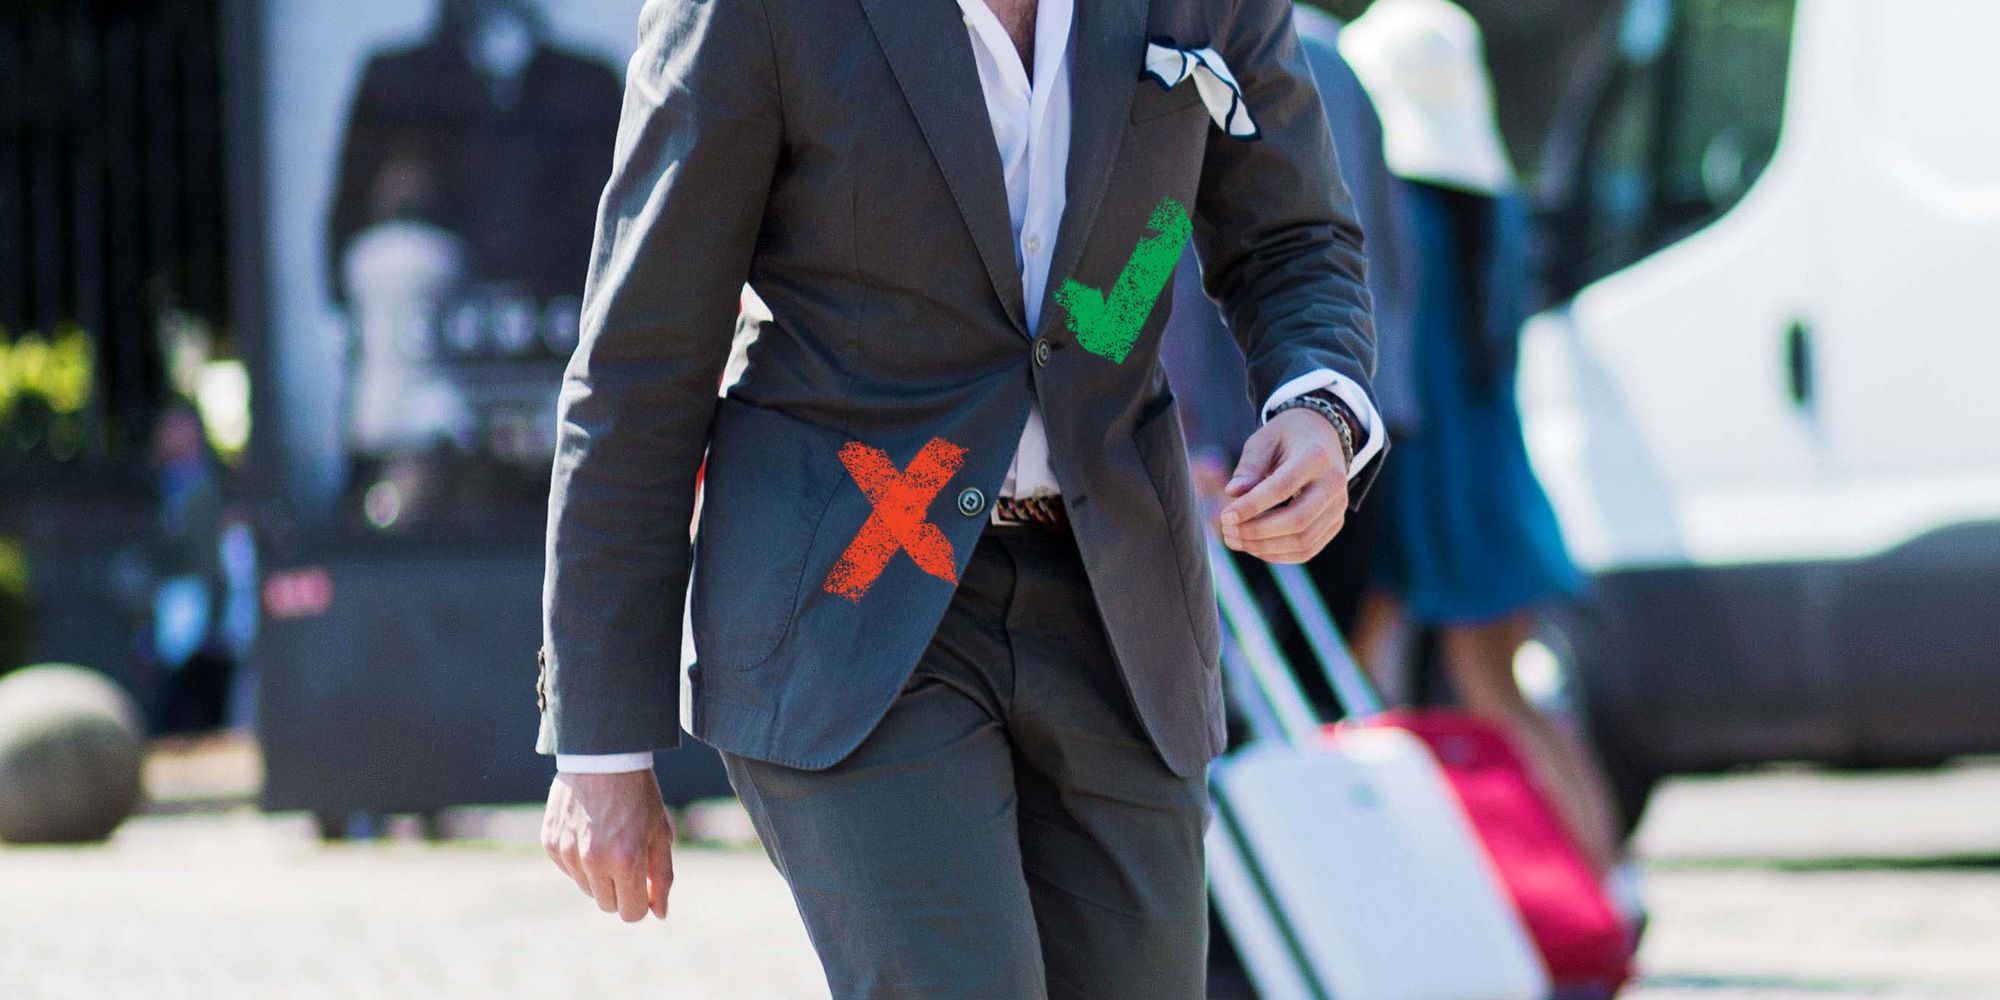 Don't Button Your Bottom Button - Advice on Wearing a Suit